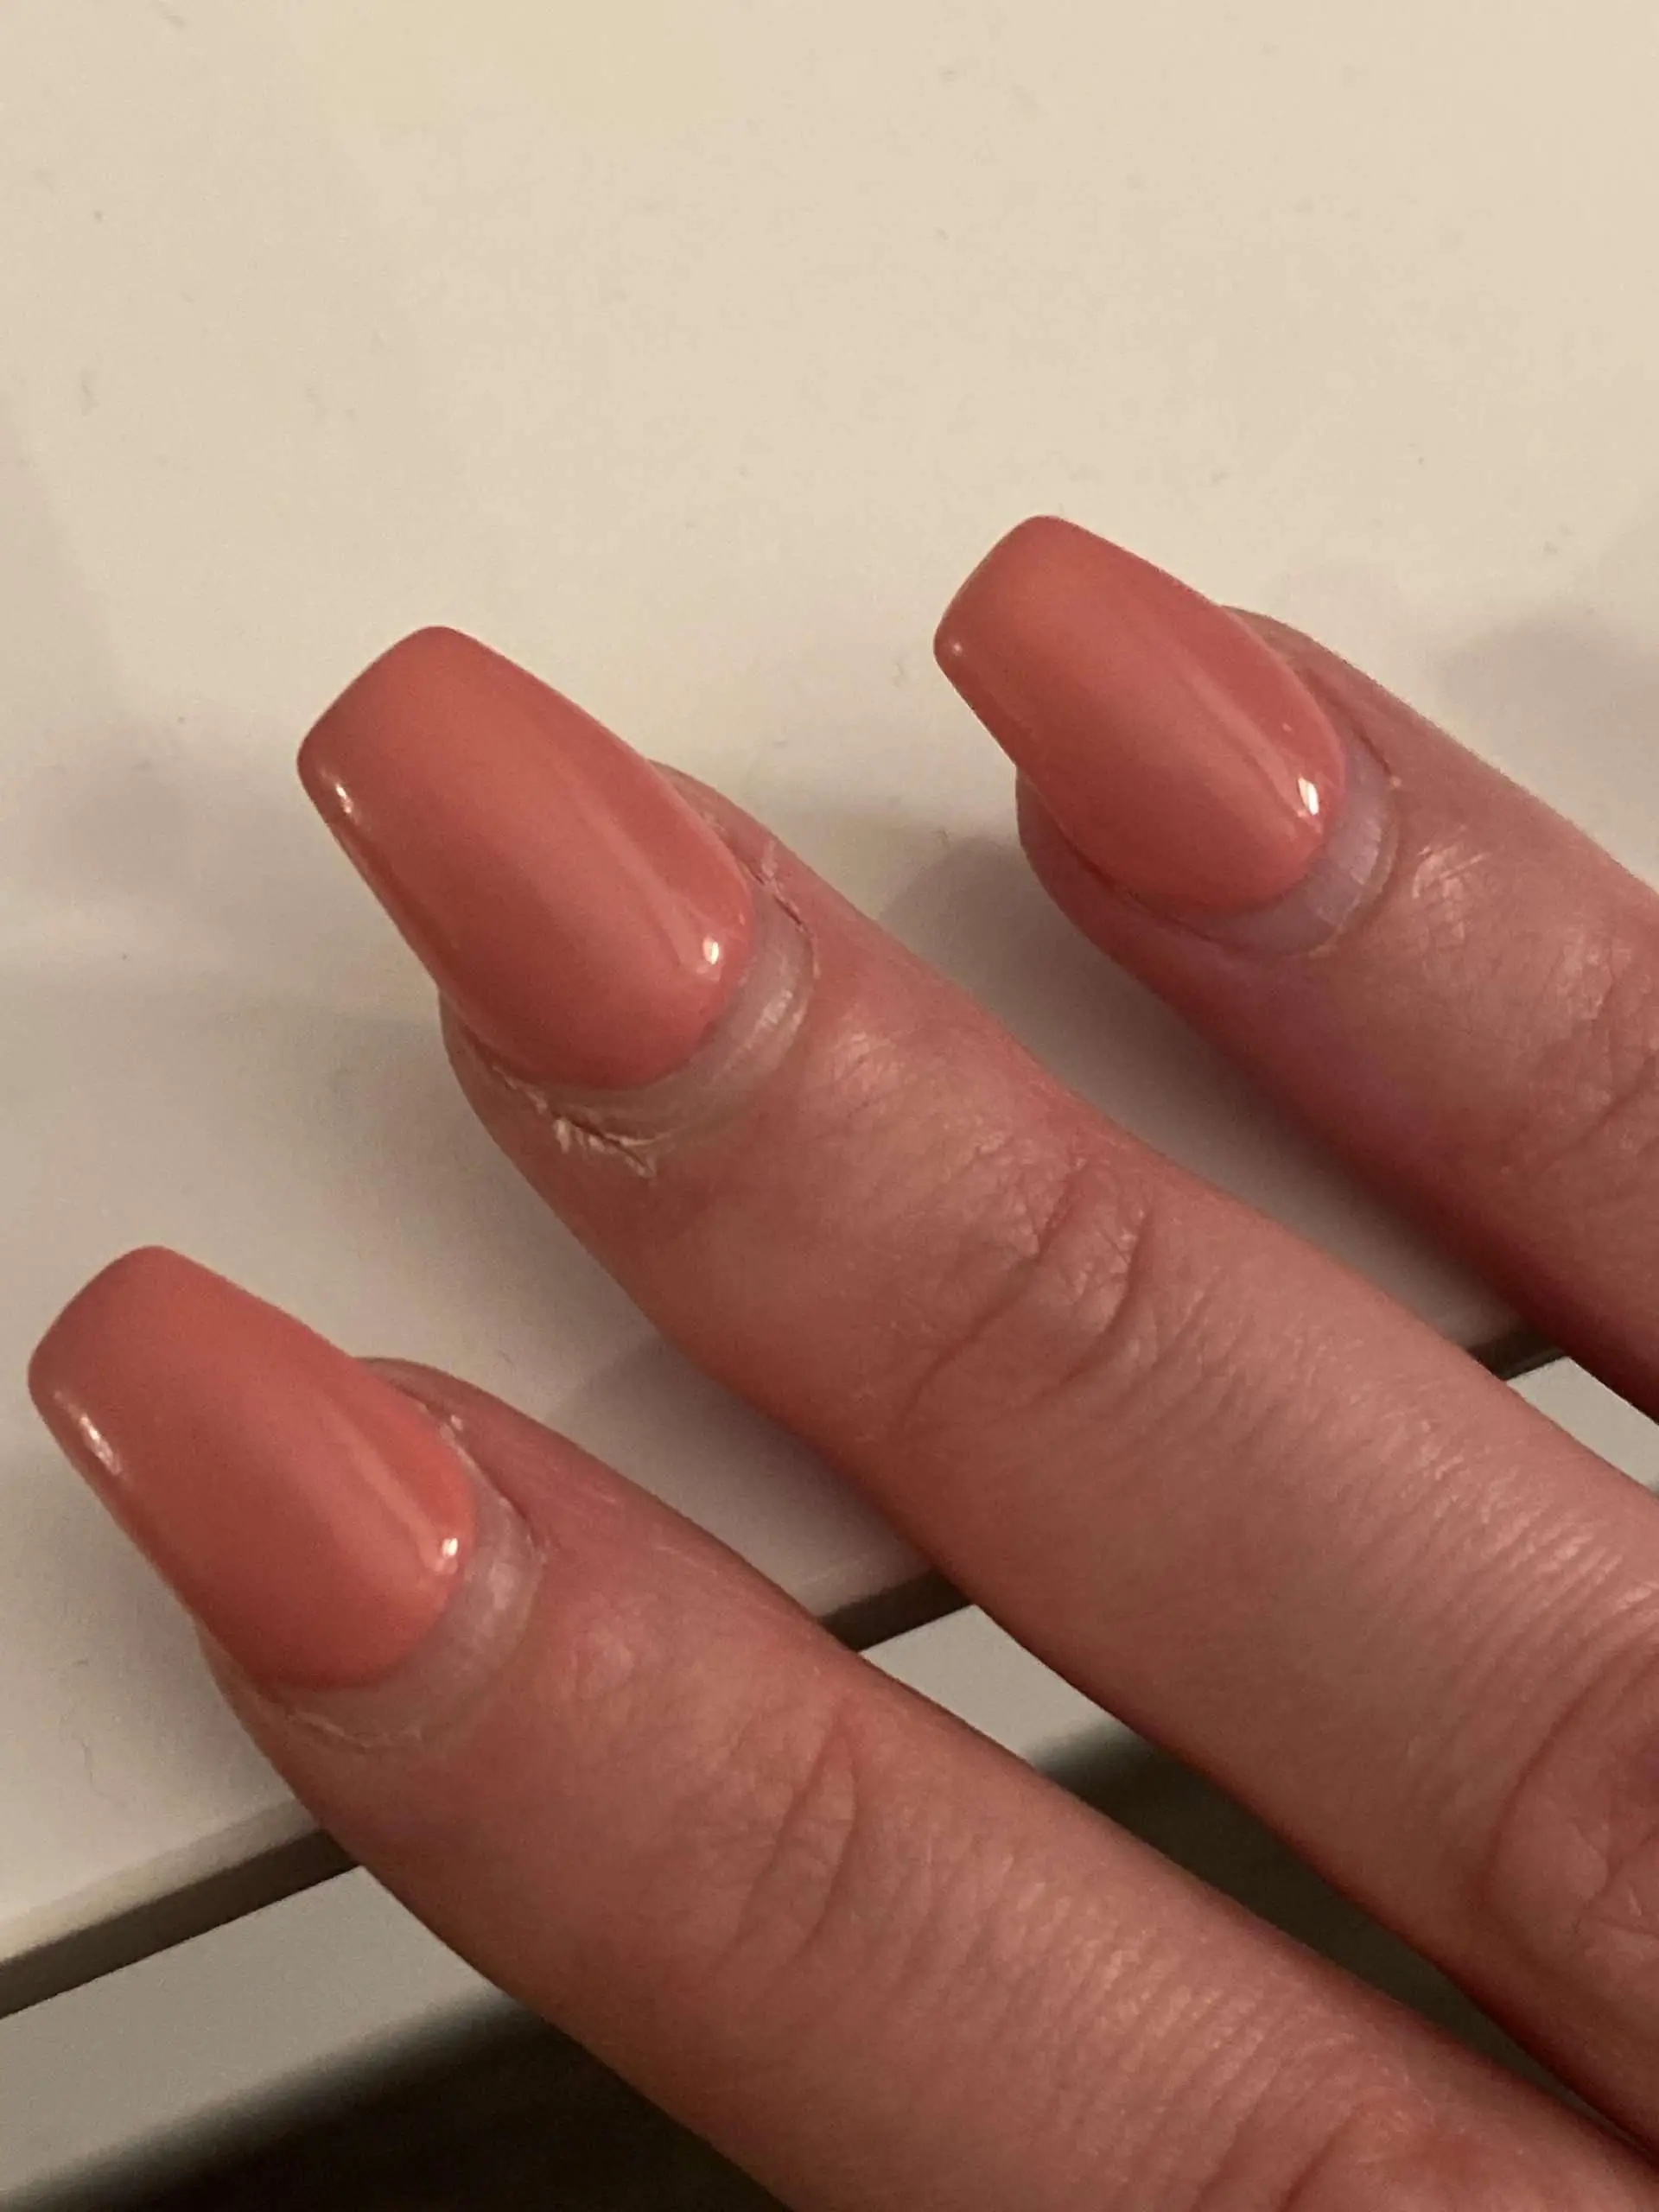 Help! These are my real nails with a dip coating and gel ...